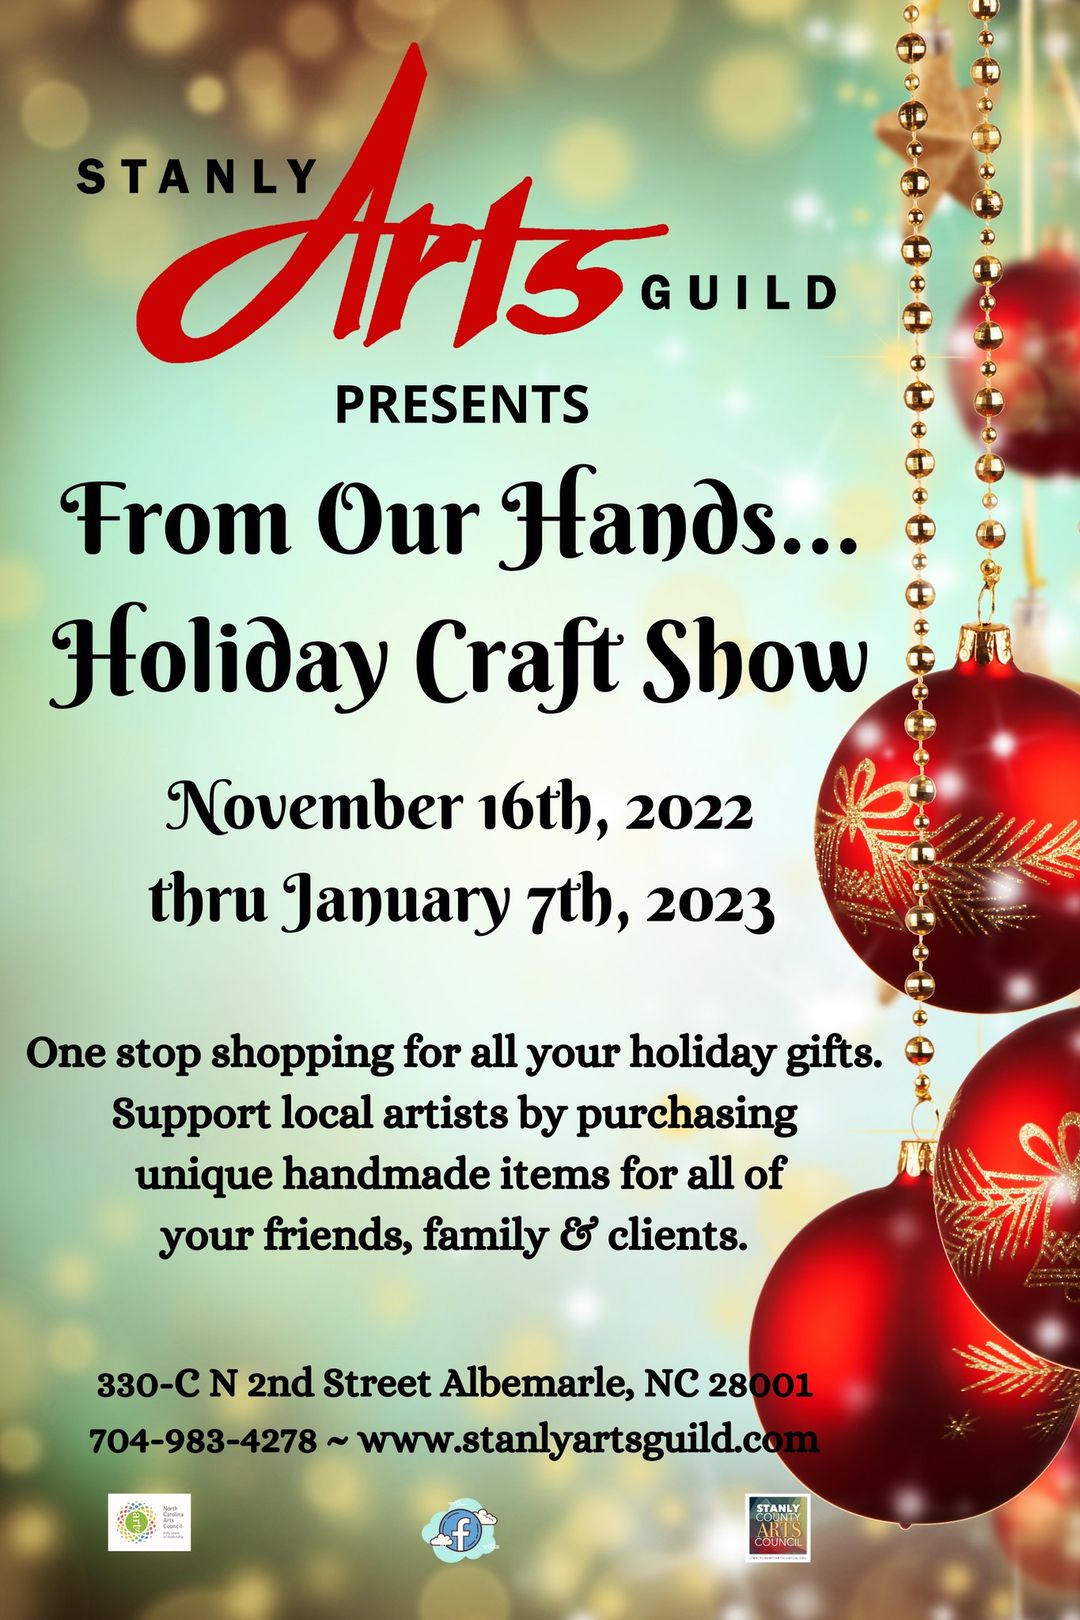 Stanly Arts Guild Holiday Craft Show – From Our Hands…